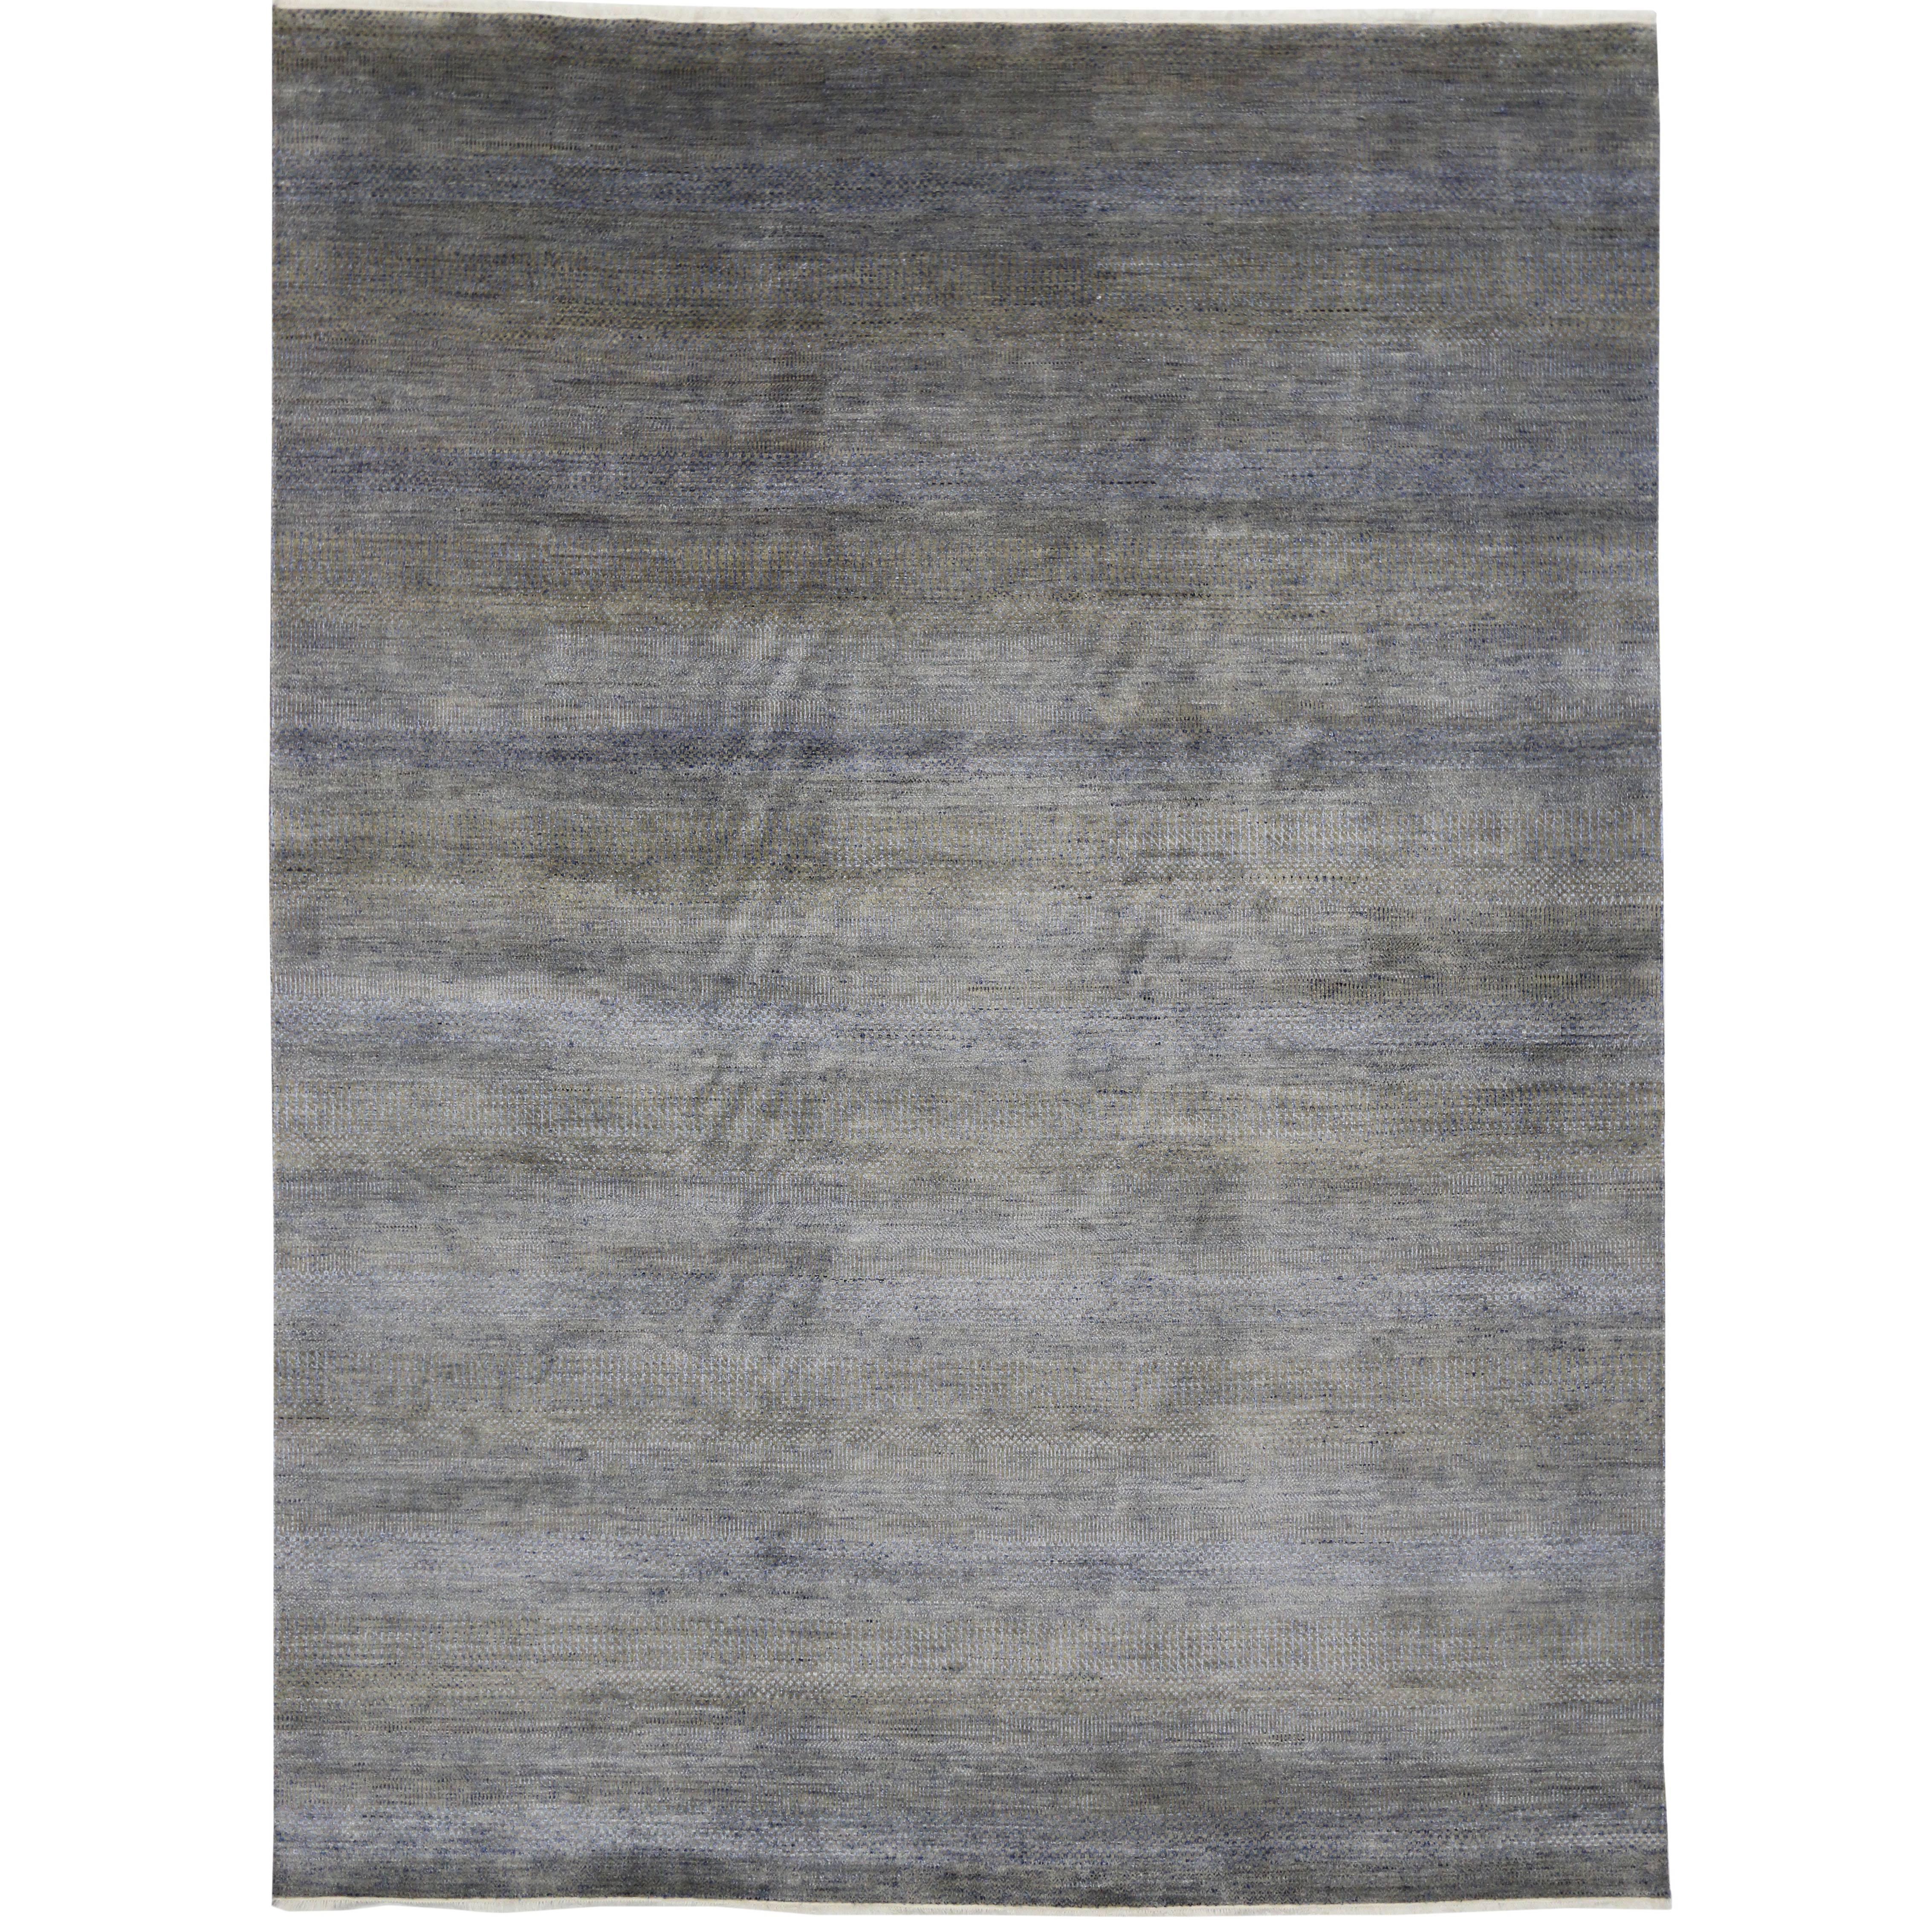 New Contemporary Transitional Gray Area Rug with Modern International Style For Sale